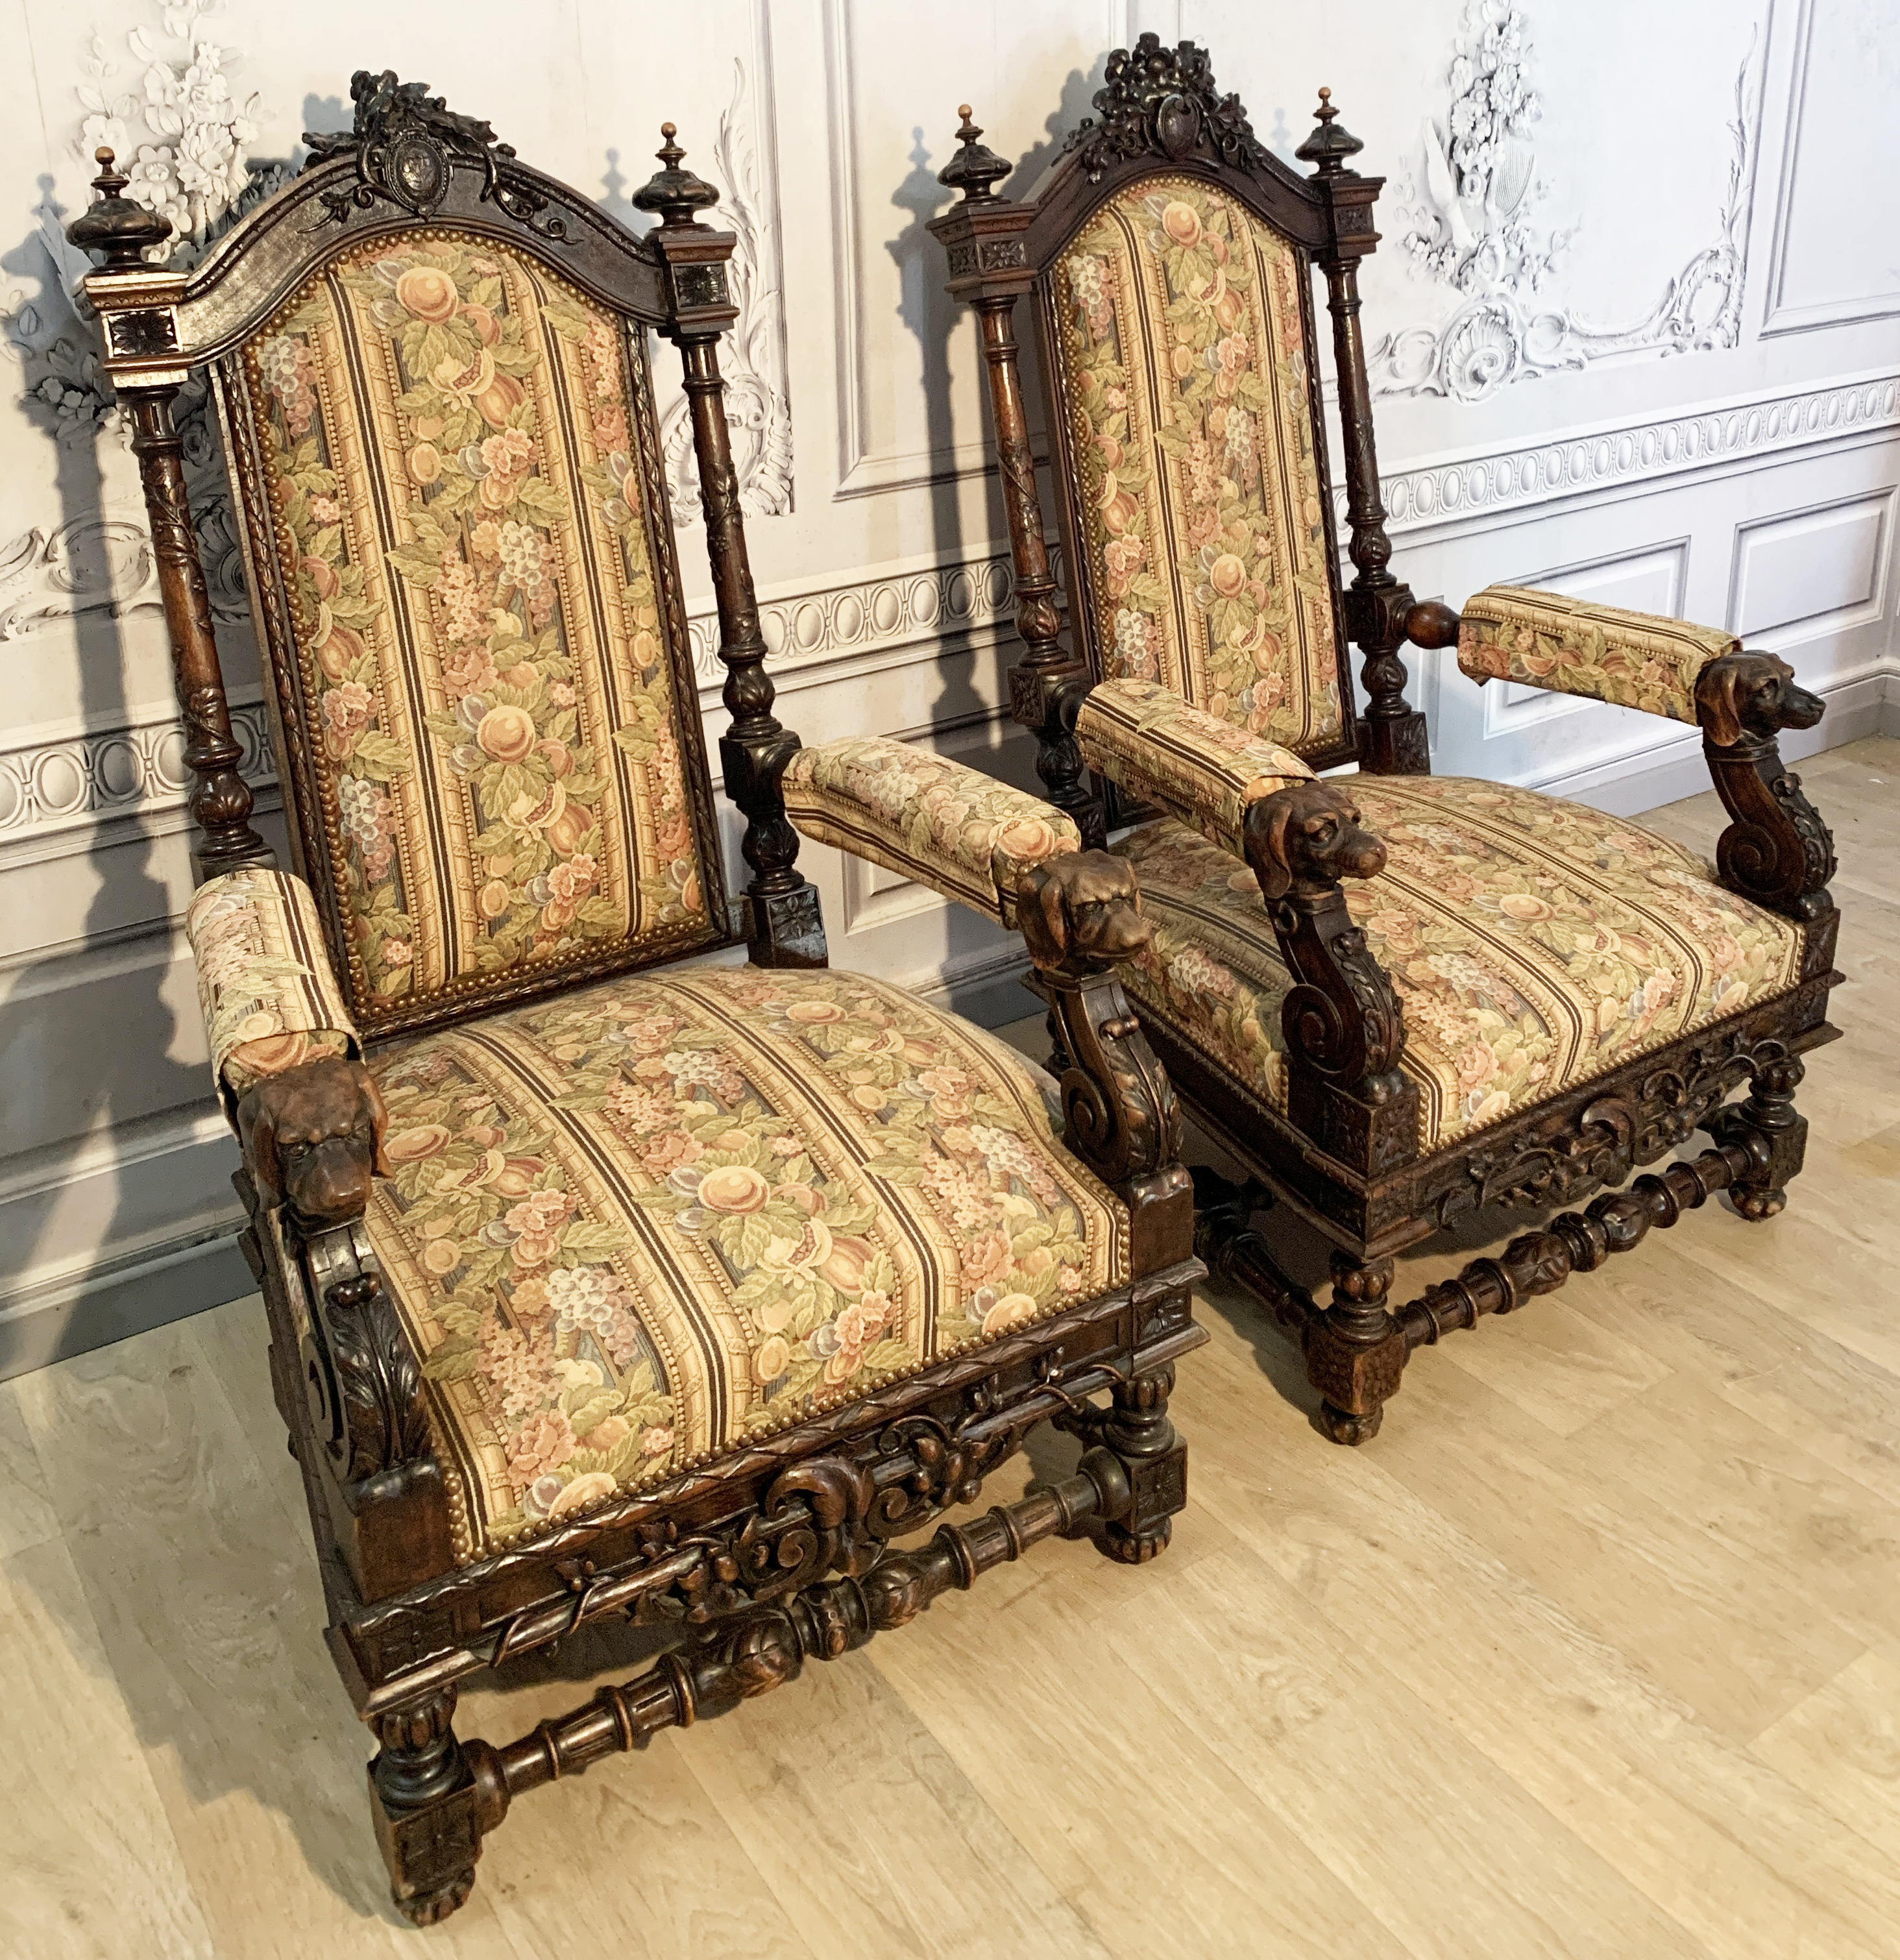 PR OF FRENCH HUNTING LODGE CHAIRS 35e993